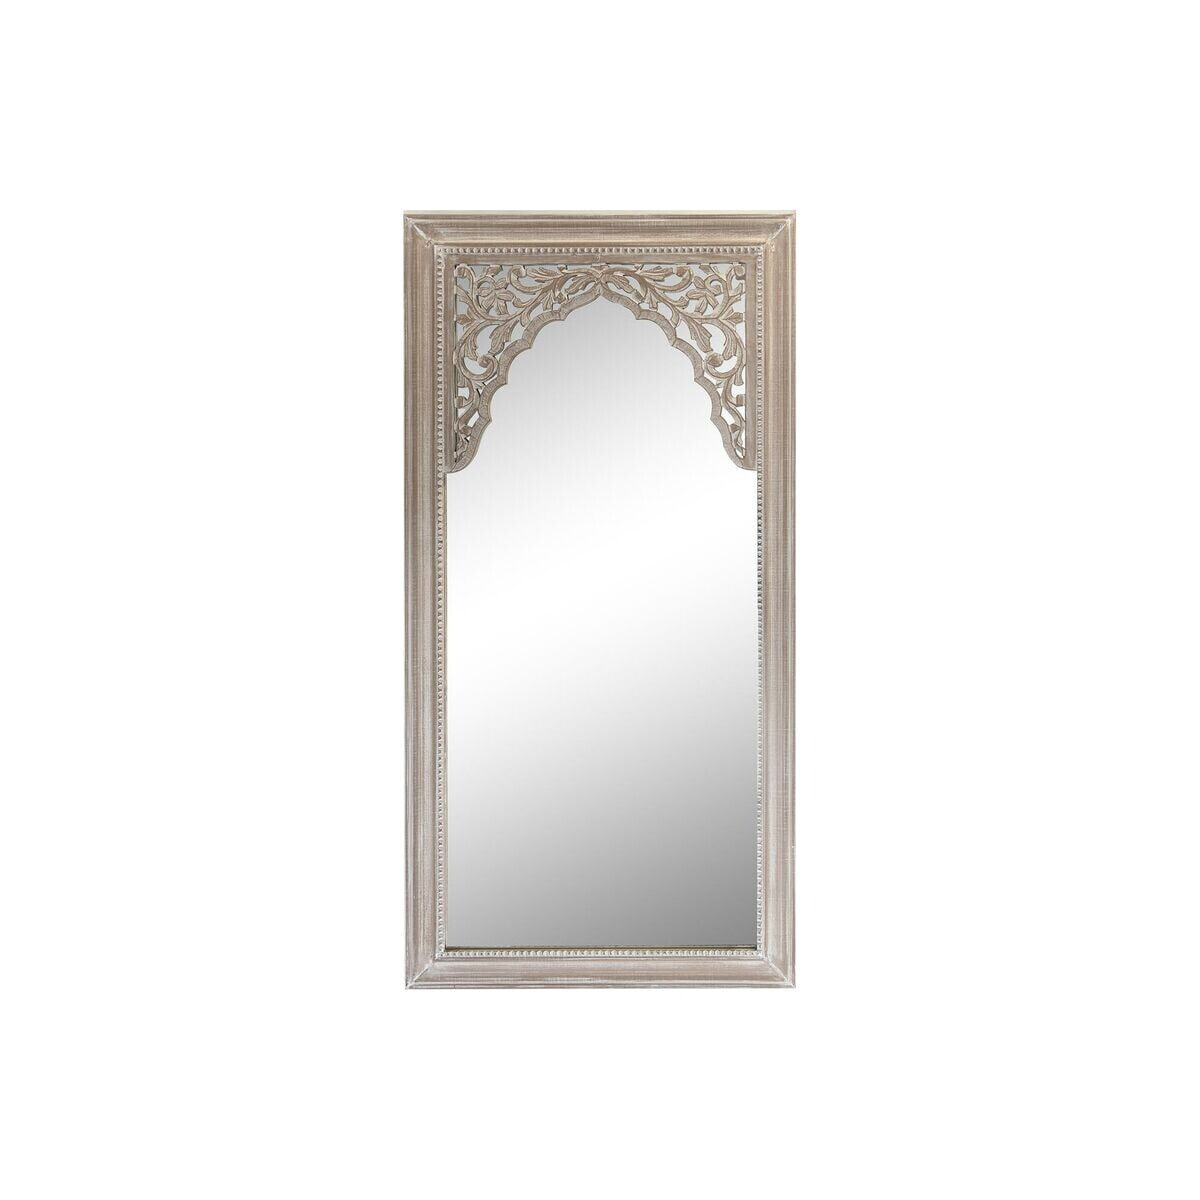 Wall mirror DKD Home Decor 90 x 2,5 x 180 cm Crystal Natural White Indian Man MDF Wood Stripped